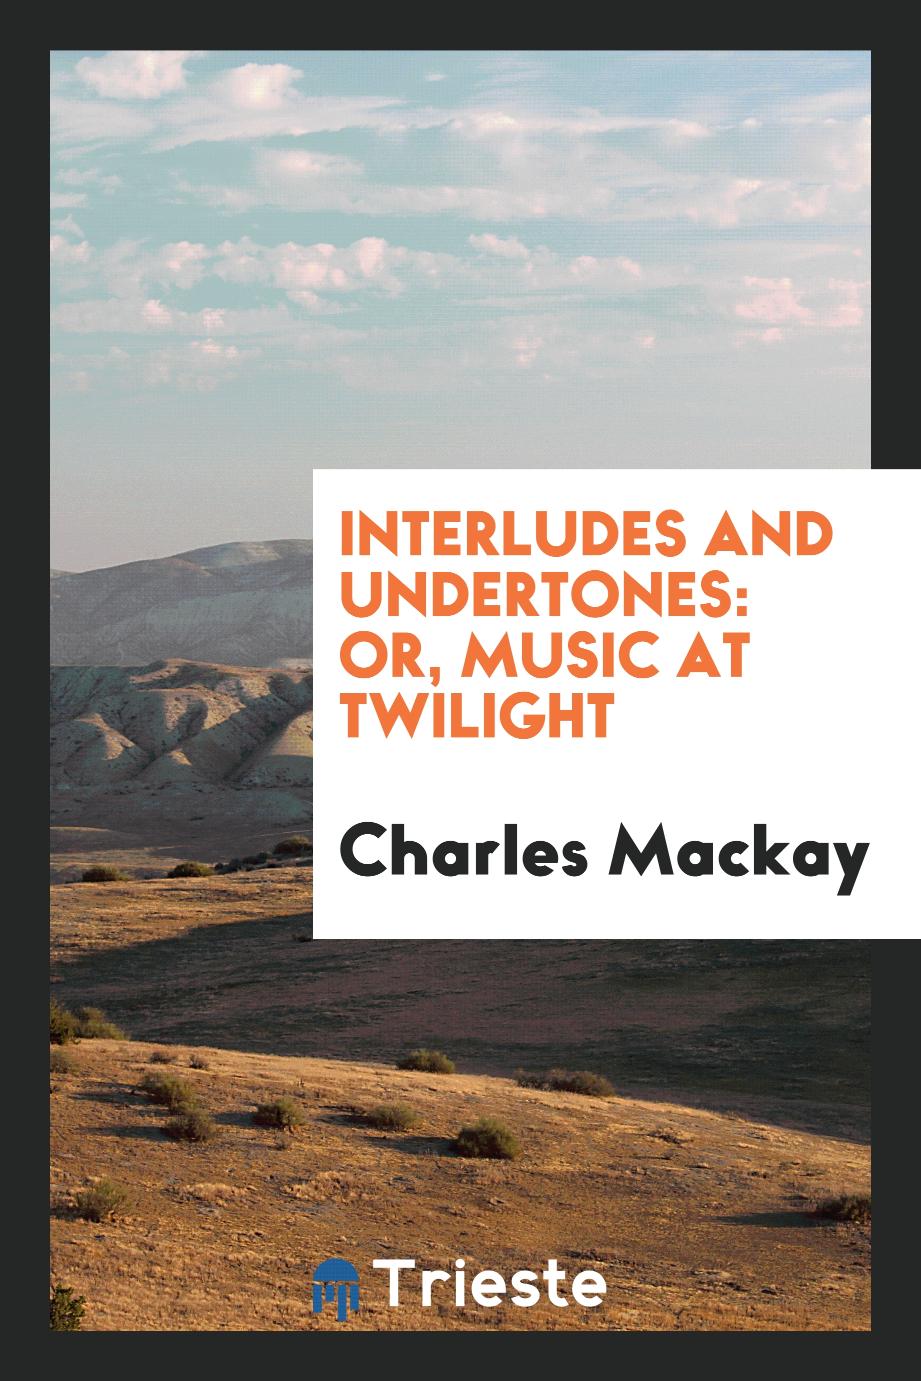 Interludes and undertones: or, Music at twilight